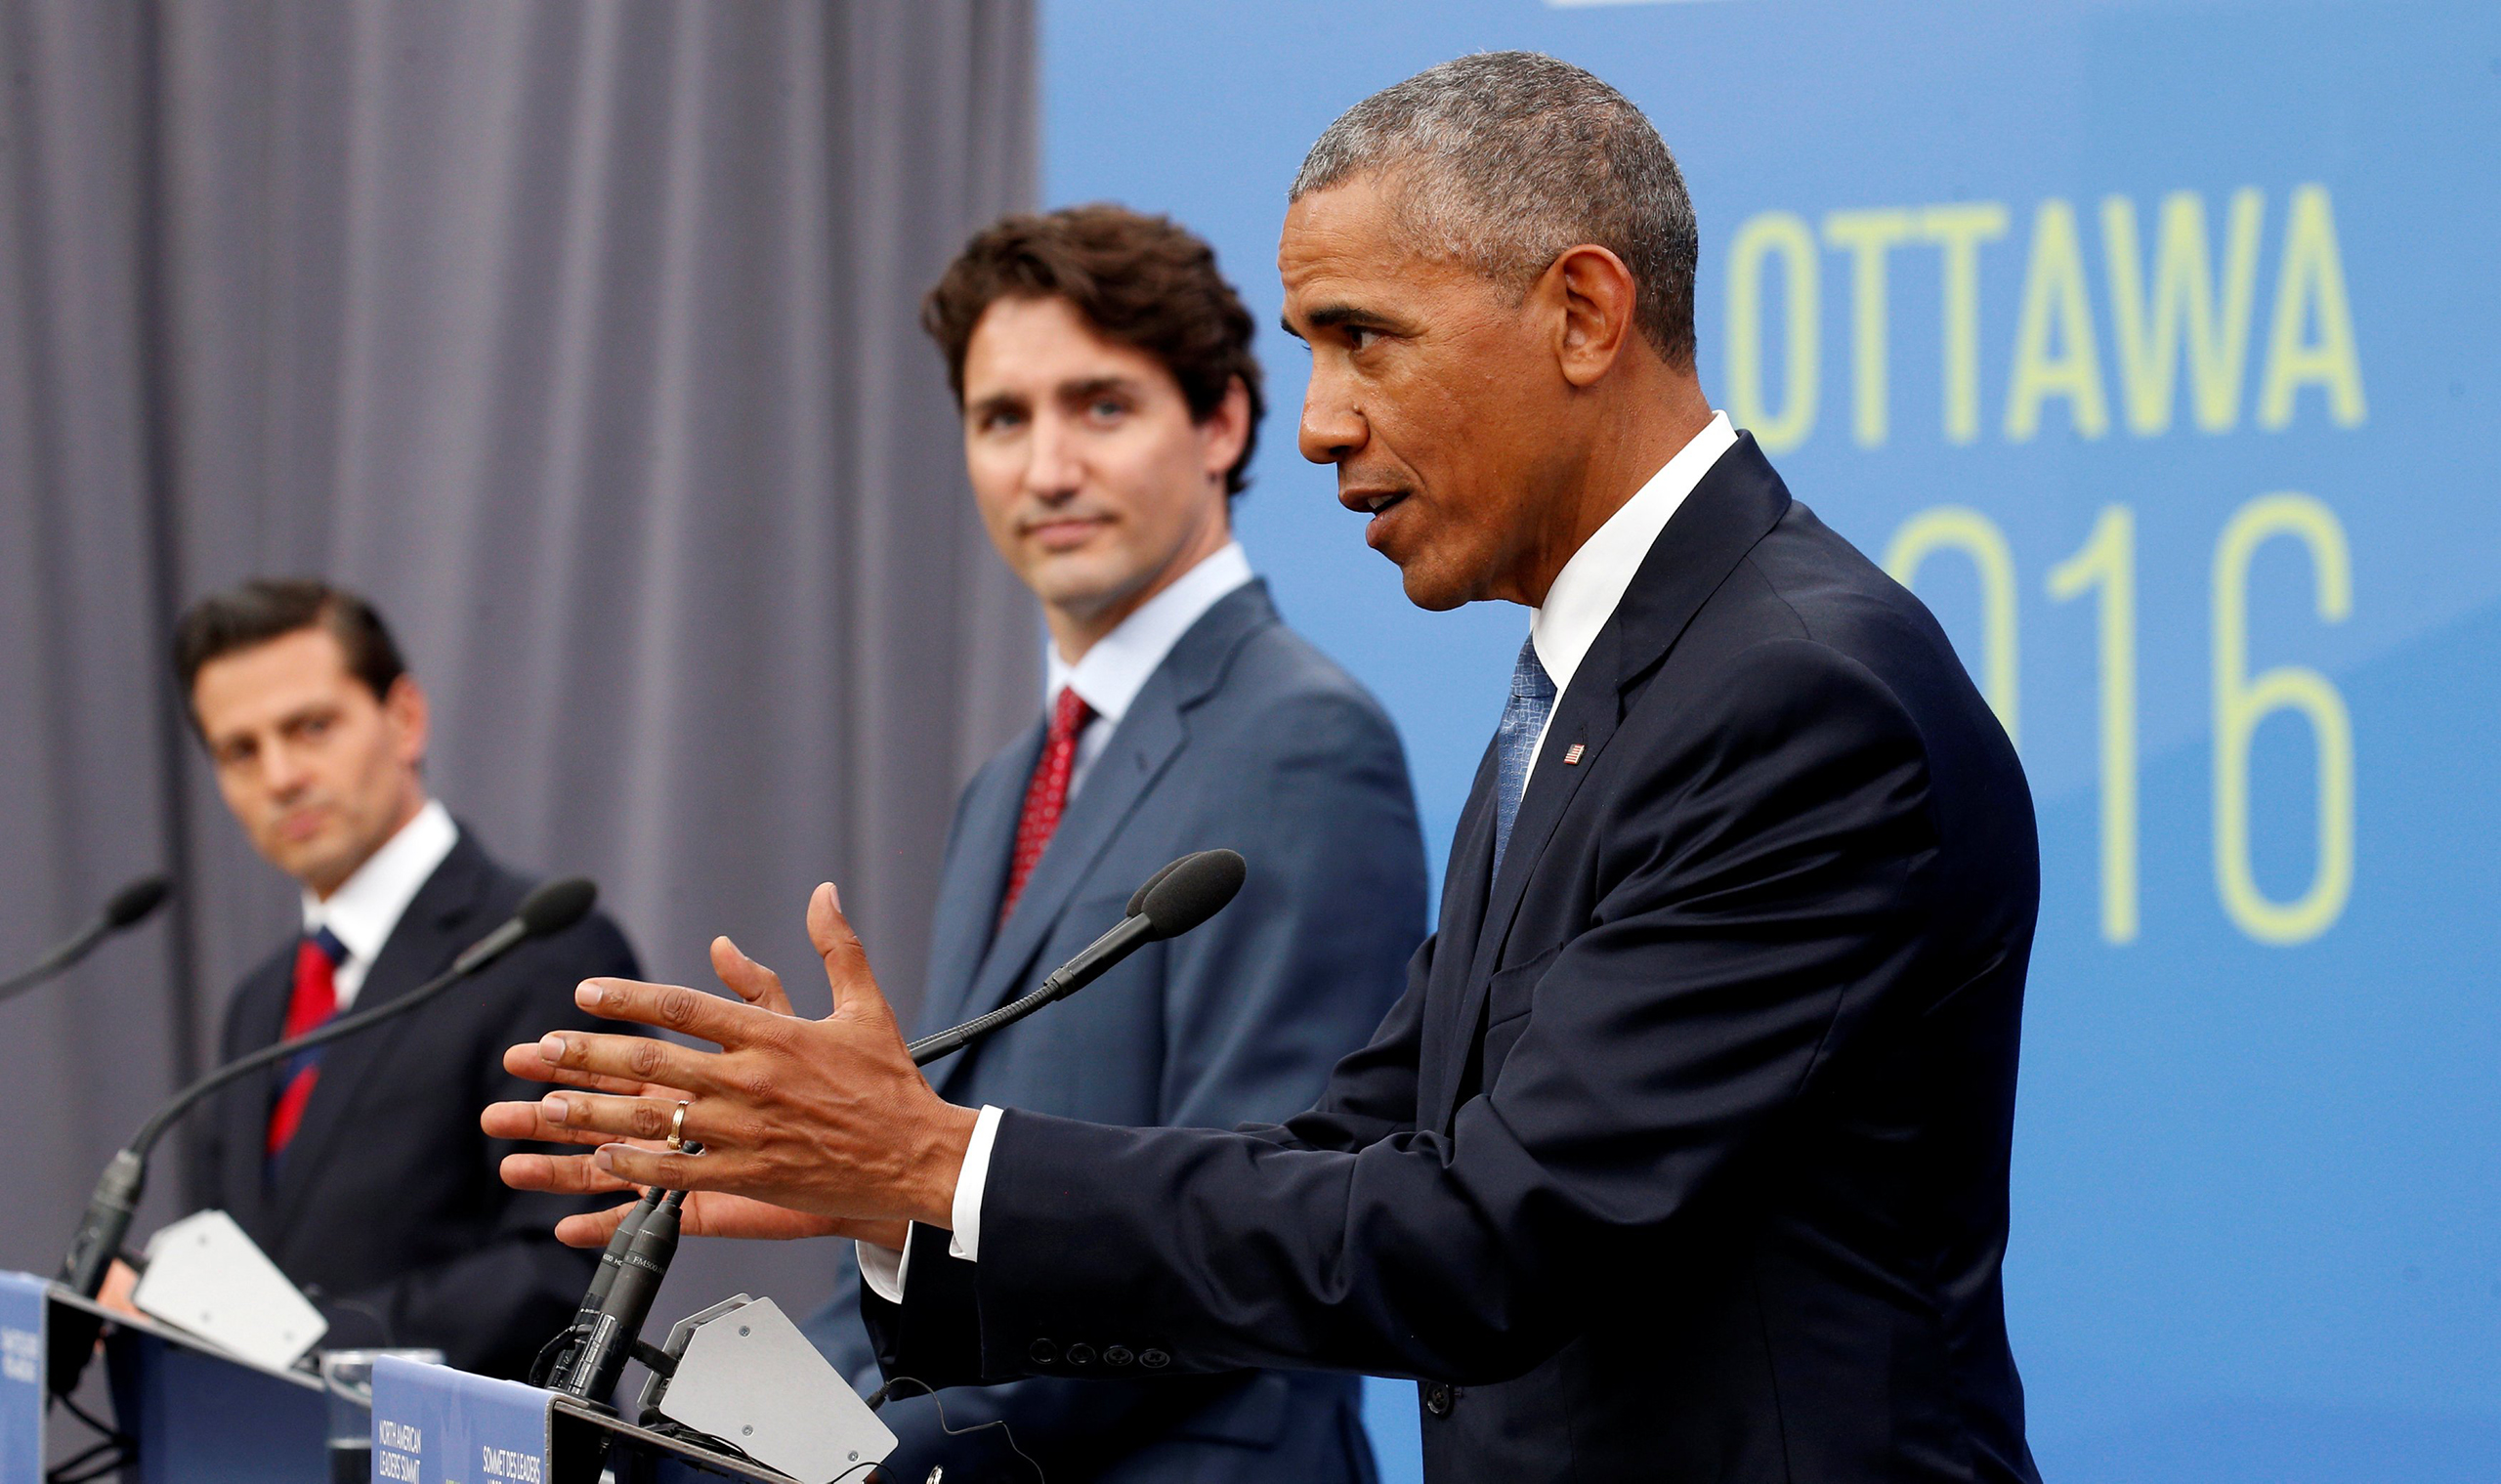 Mexican President Enrique Pena Nieto, Canadian Prime Minister Justin Trudeau and U.S. President Barack Obama take part in a news conference during the North American Leaders' Summit in Ottawa